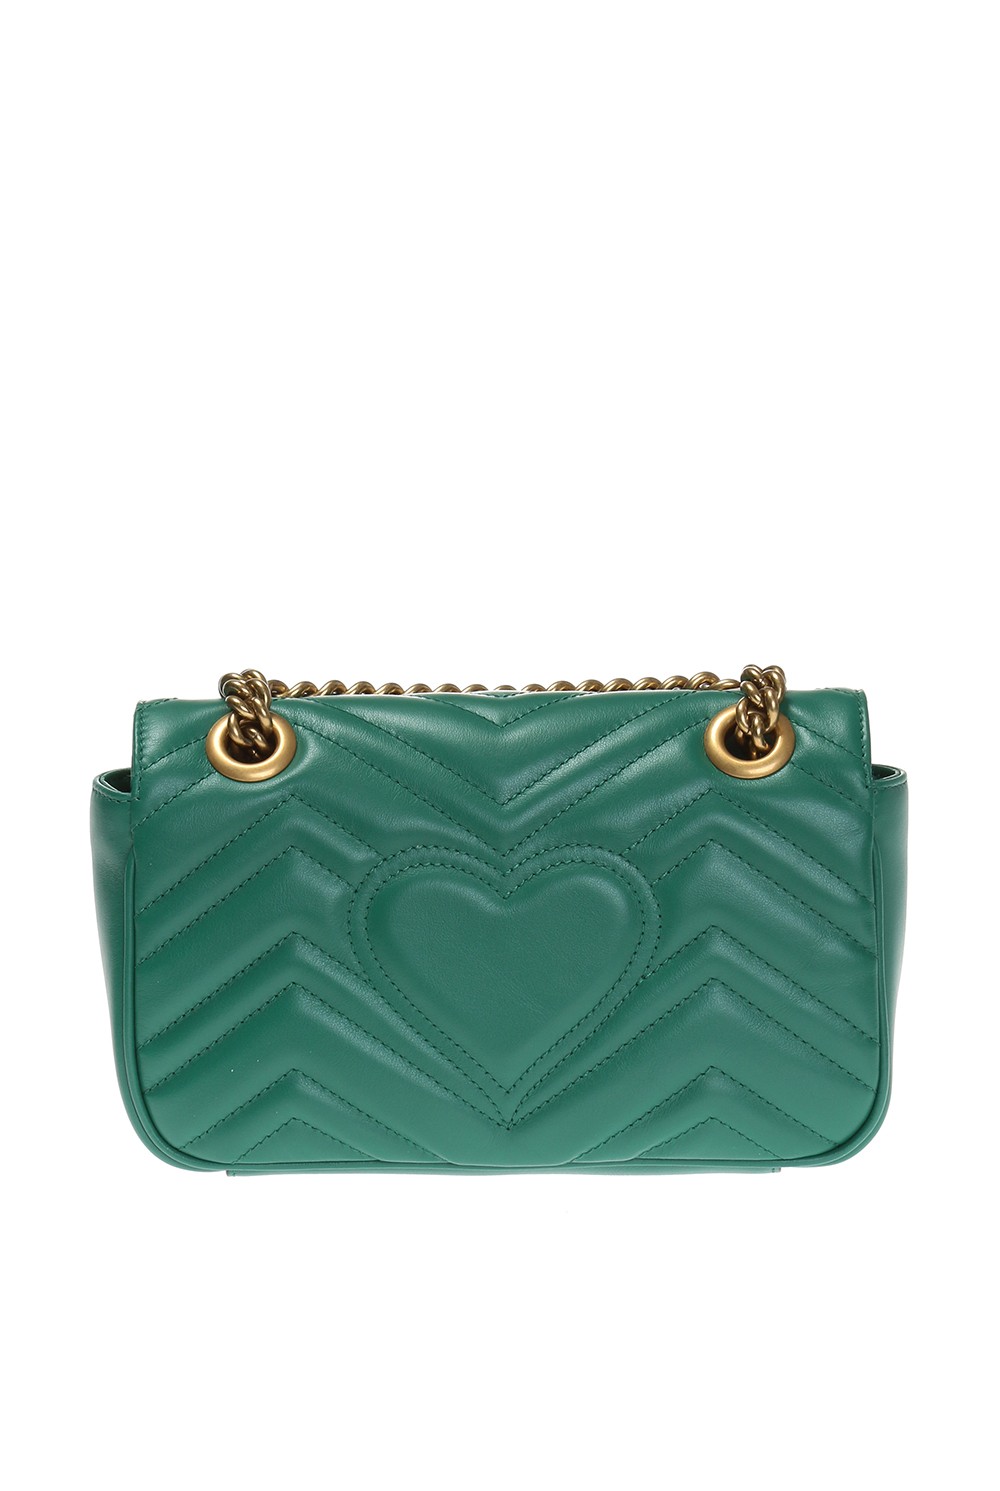 Gucci Gg Marmont Medium Leather Shoulder Bag in Green